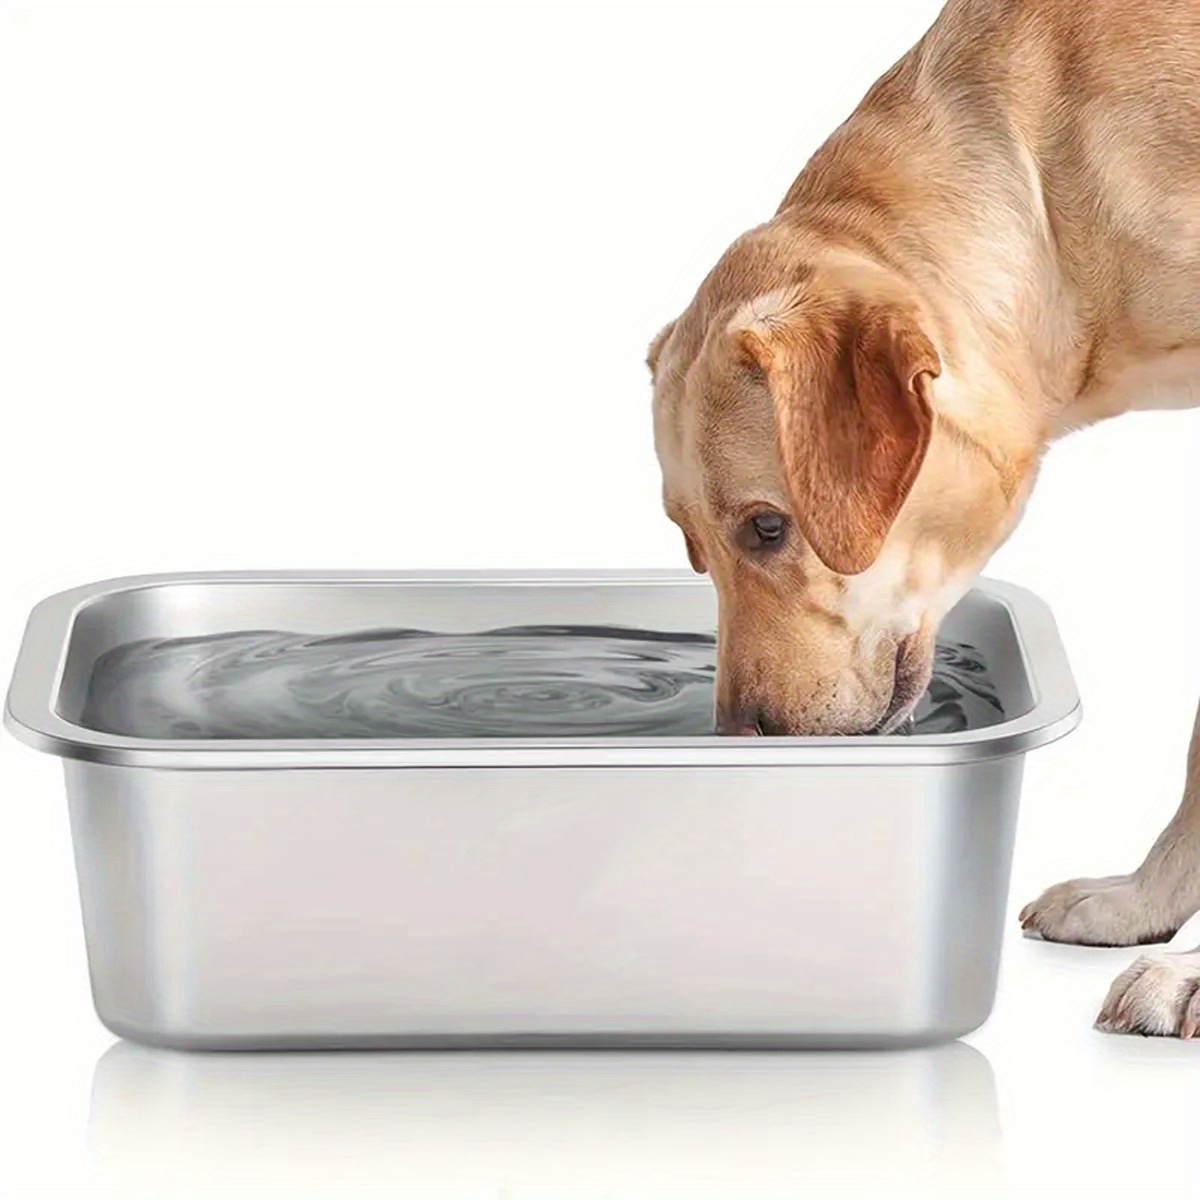 

Large Capacity Stainless Steel Dog Bowl, Drop Resistant Durable Dog Food Bowl, Water Drinking Basin For Large Dogs